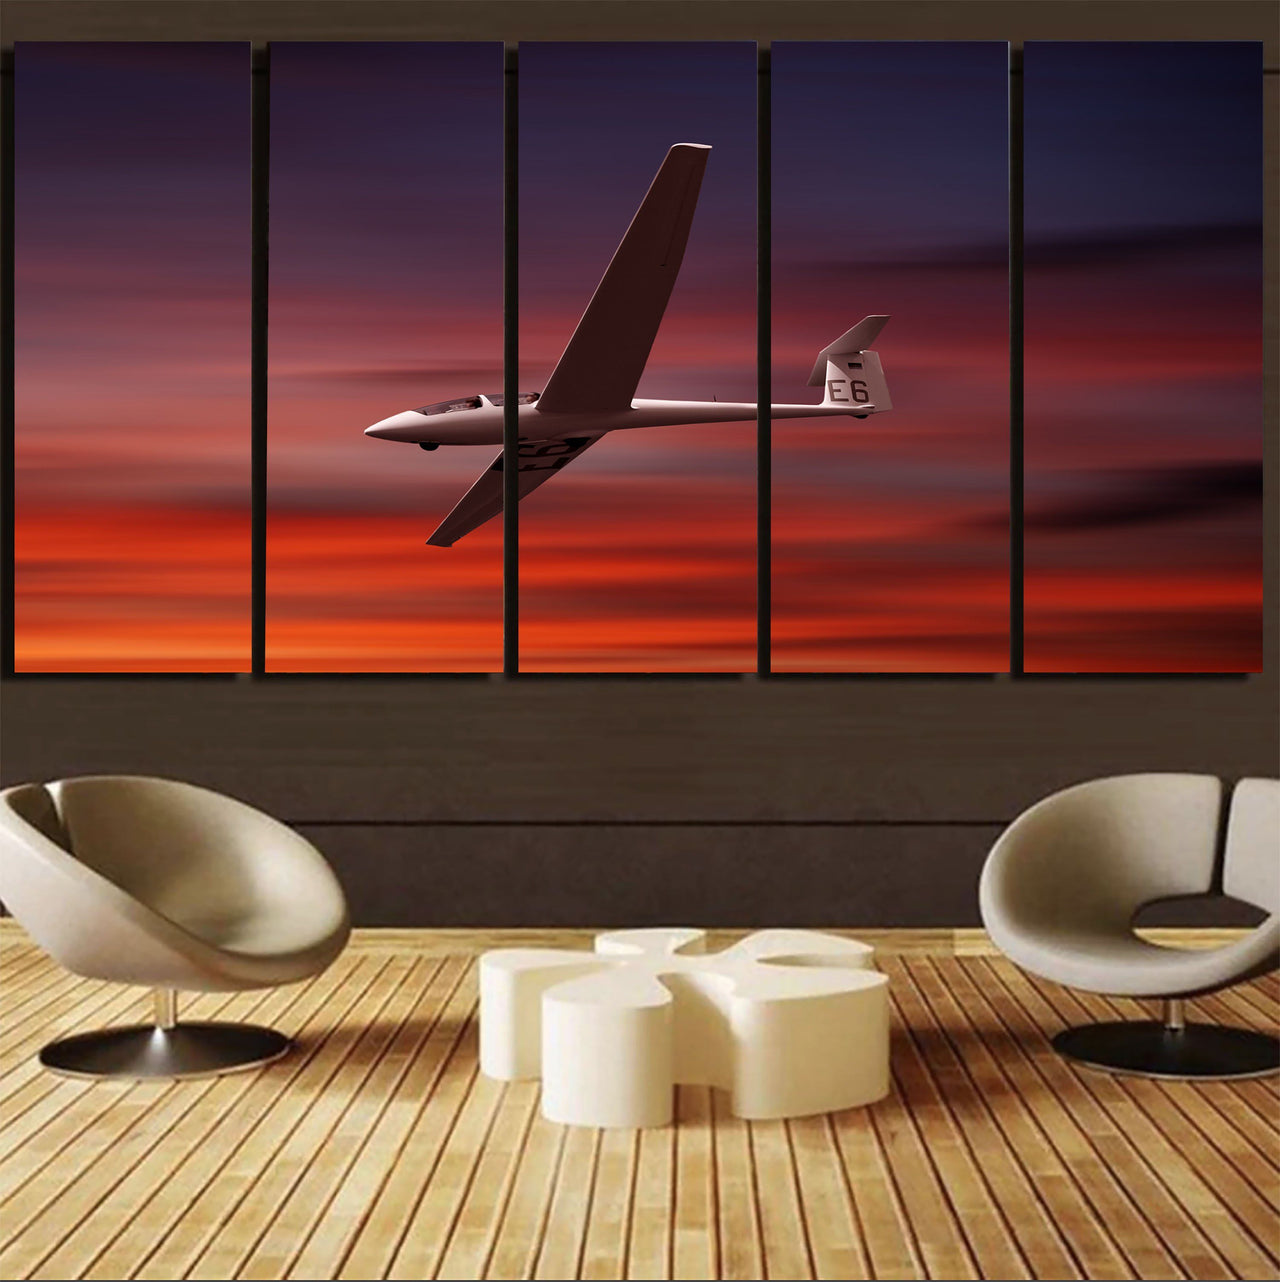 Cruising Glider at Sunset Printed Canvas Prints (5 Pieces) Aviation Shop 